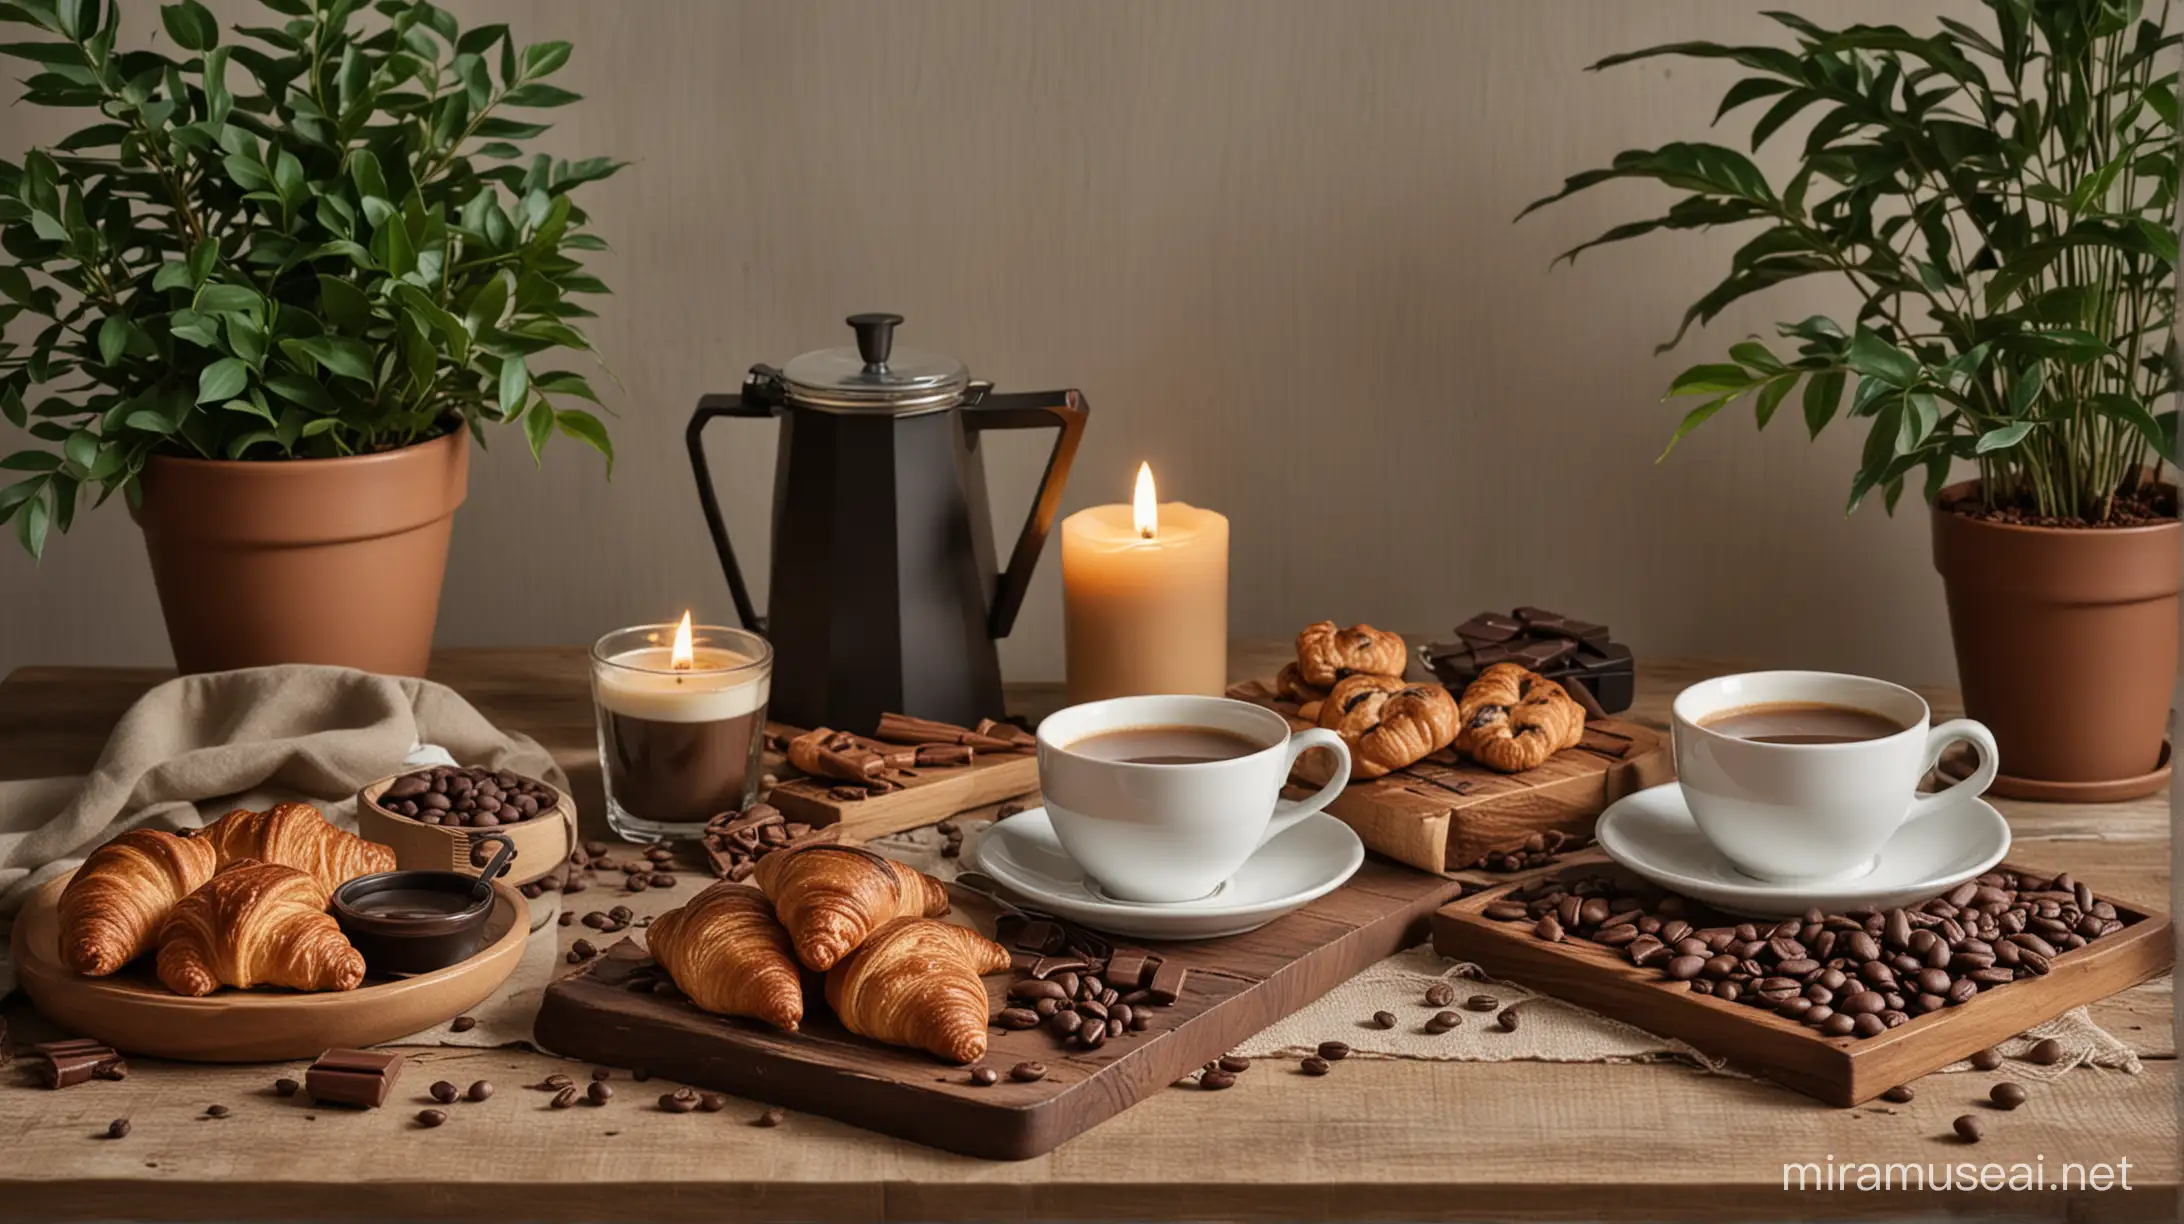 Cozy Rustic Coffee Setup with Chocolate Treats and Aromatic Candle